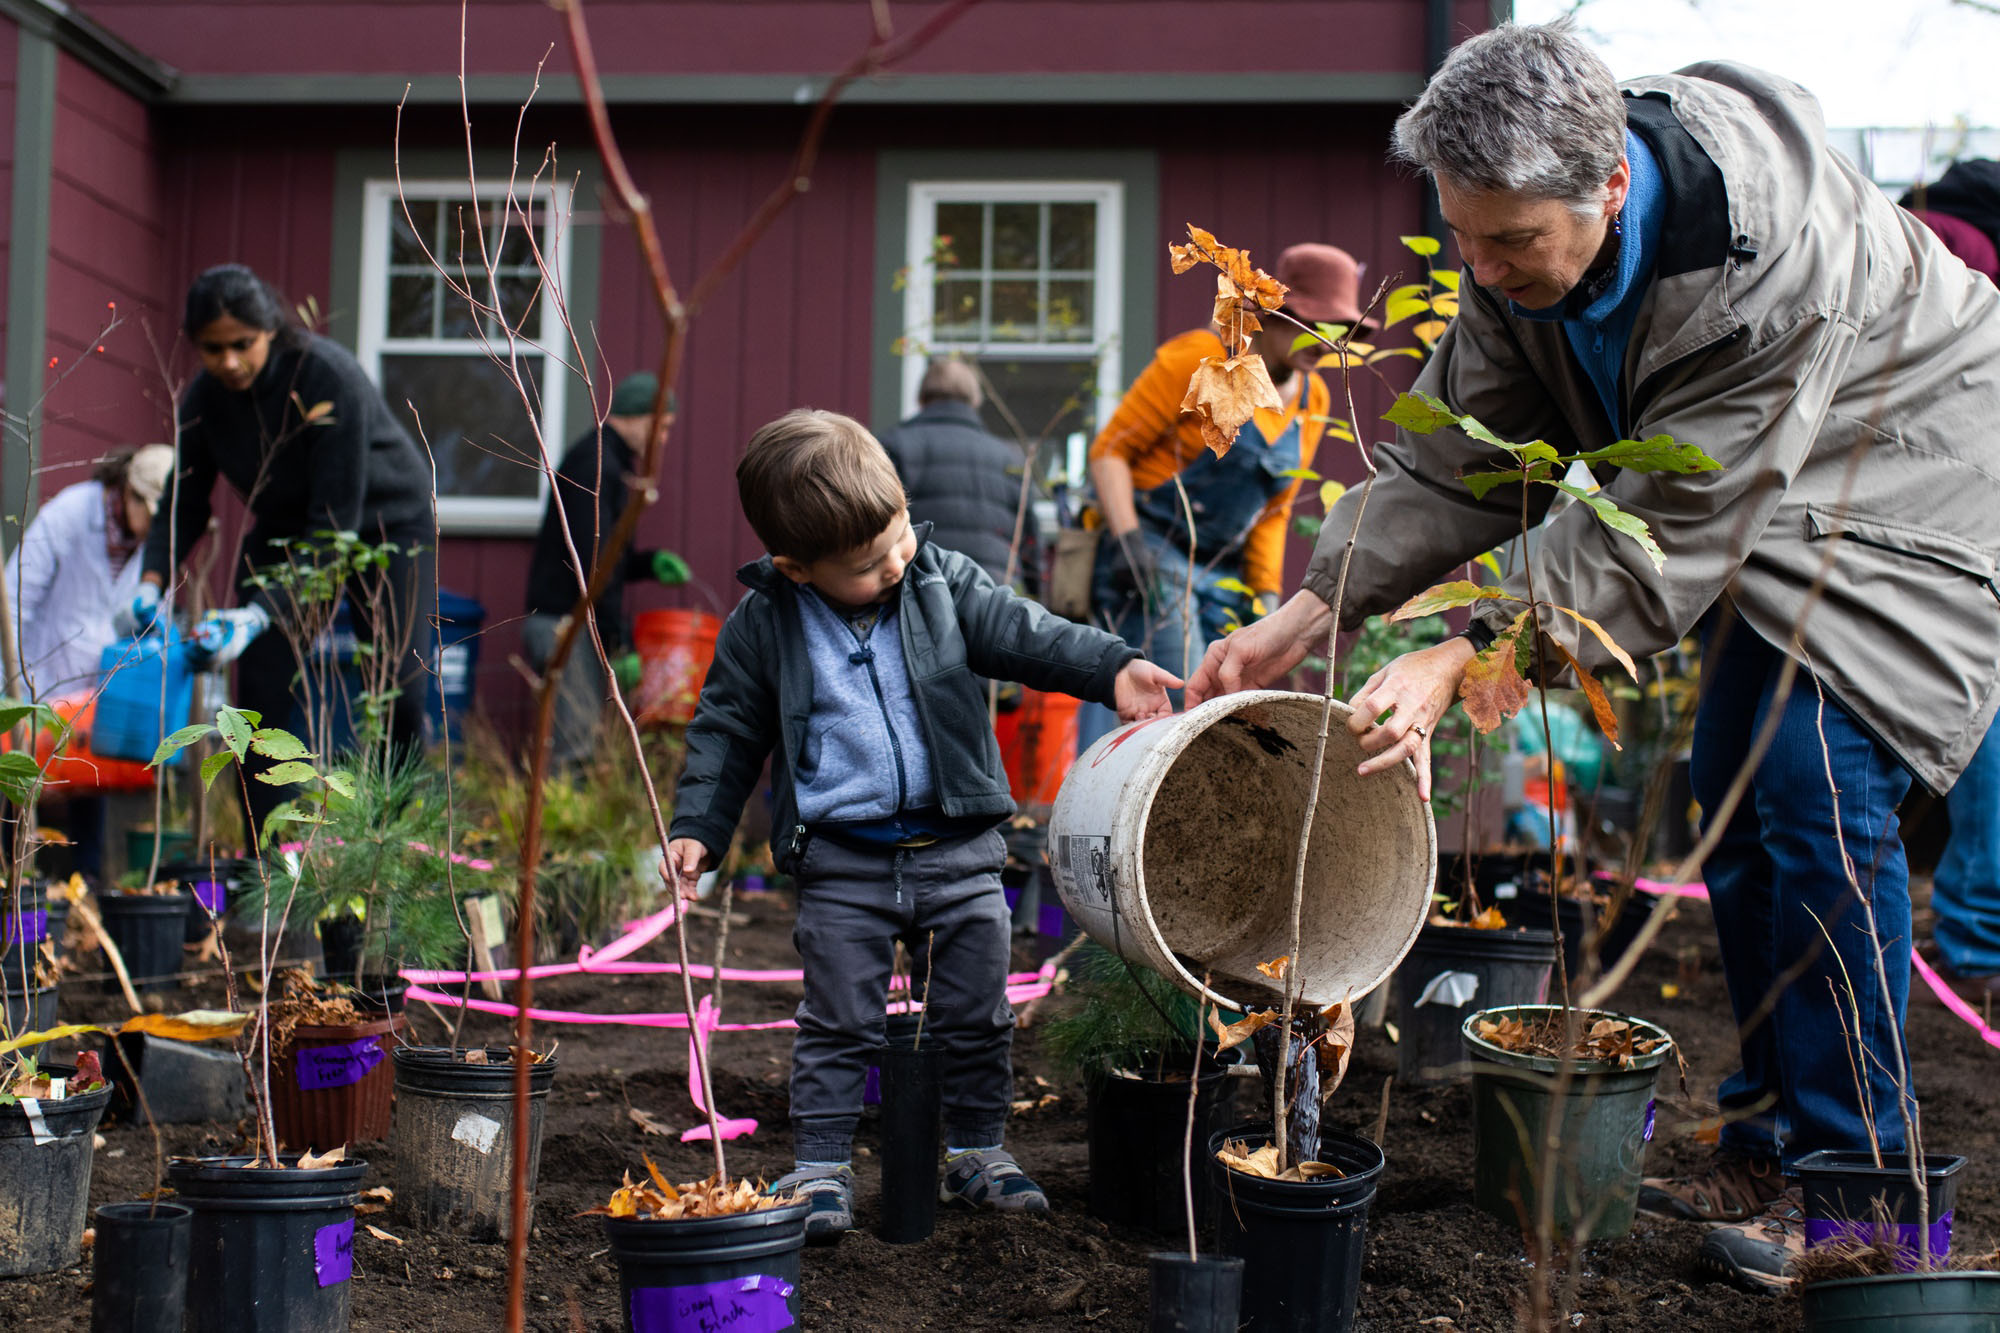 Francis Dobbs, 3, helps tip a bucket to water a plant in Cambridge’s first ever Miyawaki Forest Saturday morning. More than three dozen Cambridge residents gathered to plant more than 40 species of plants native to New England in a single front yard to guard against biodiversity loss.